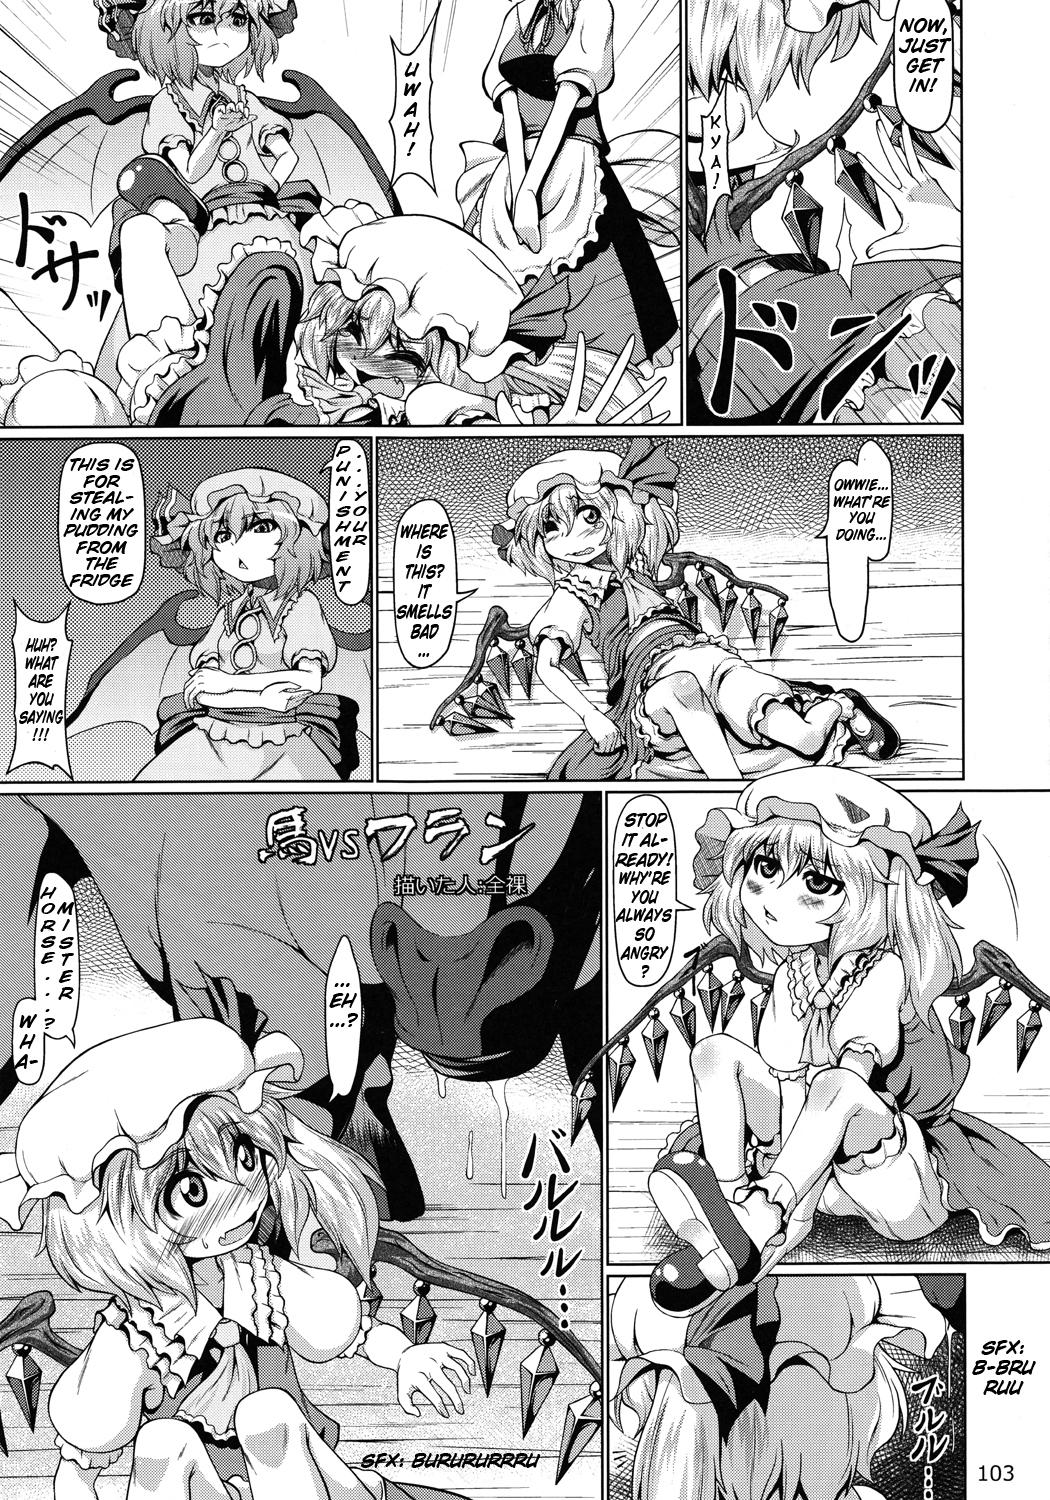 Hair Horse vs Flan - Touhou project Step Fantasy - Page 1